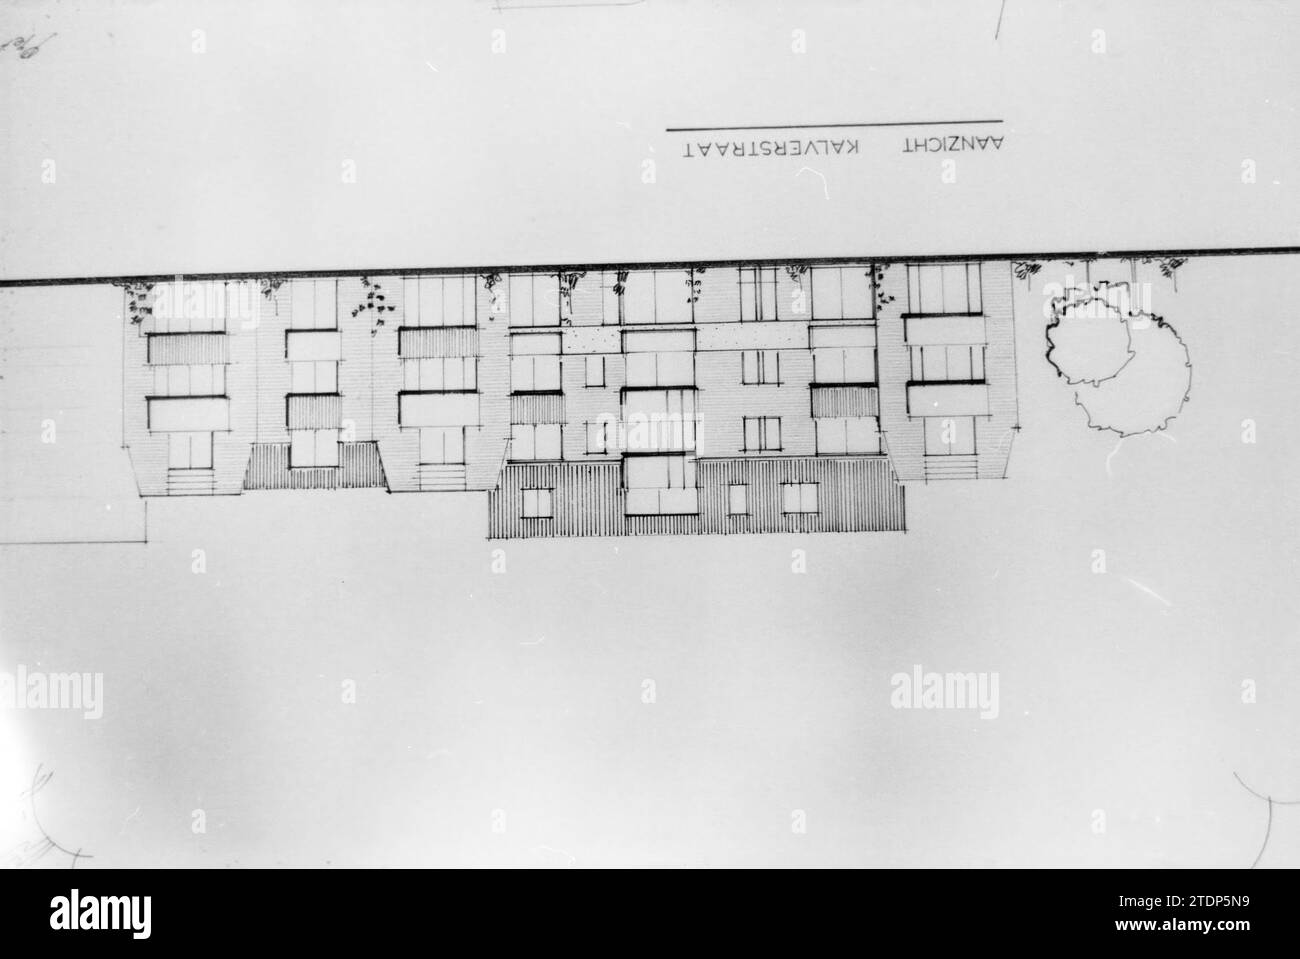 Design drawing of new construction complex Kalverstraat, 07-07-1979, Whizgle News from the Past, Tailored for the Future. Explore historical narratives, Dutch The Netherlands agency image with a modern perspective, bridging the gap between yesterday's events and tomorrow's insights. A timeless journey shaping the stories that shape our future Stock Photo